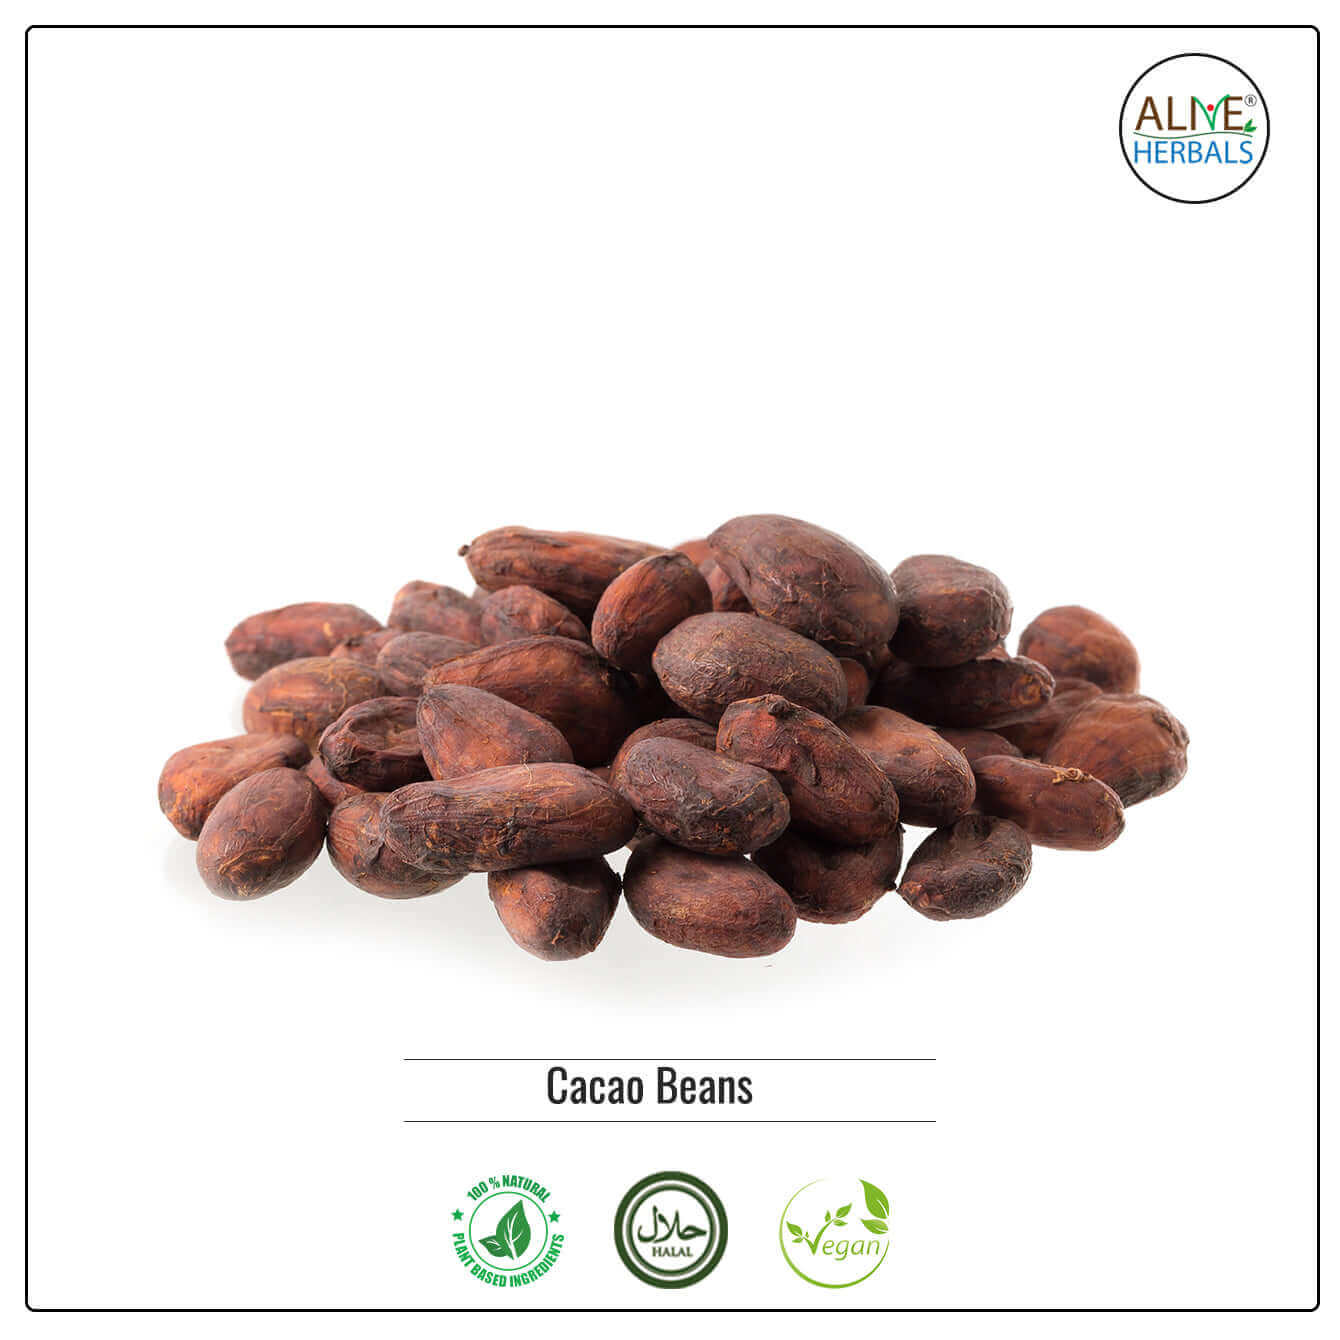 Cacao Beans - Shop at Natural Food Store | Alive Herbals.